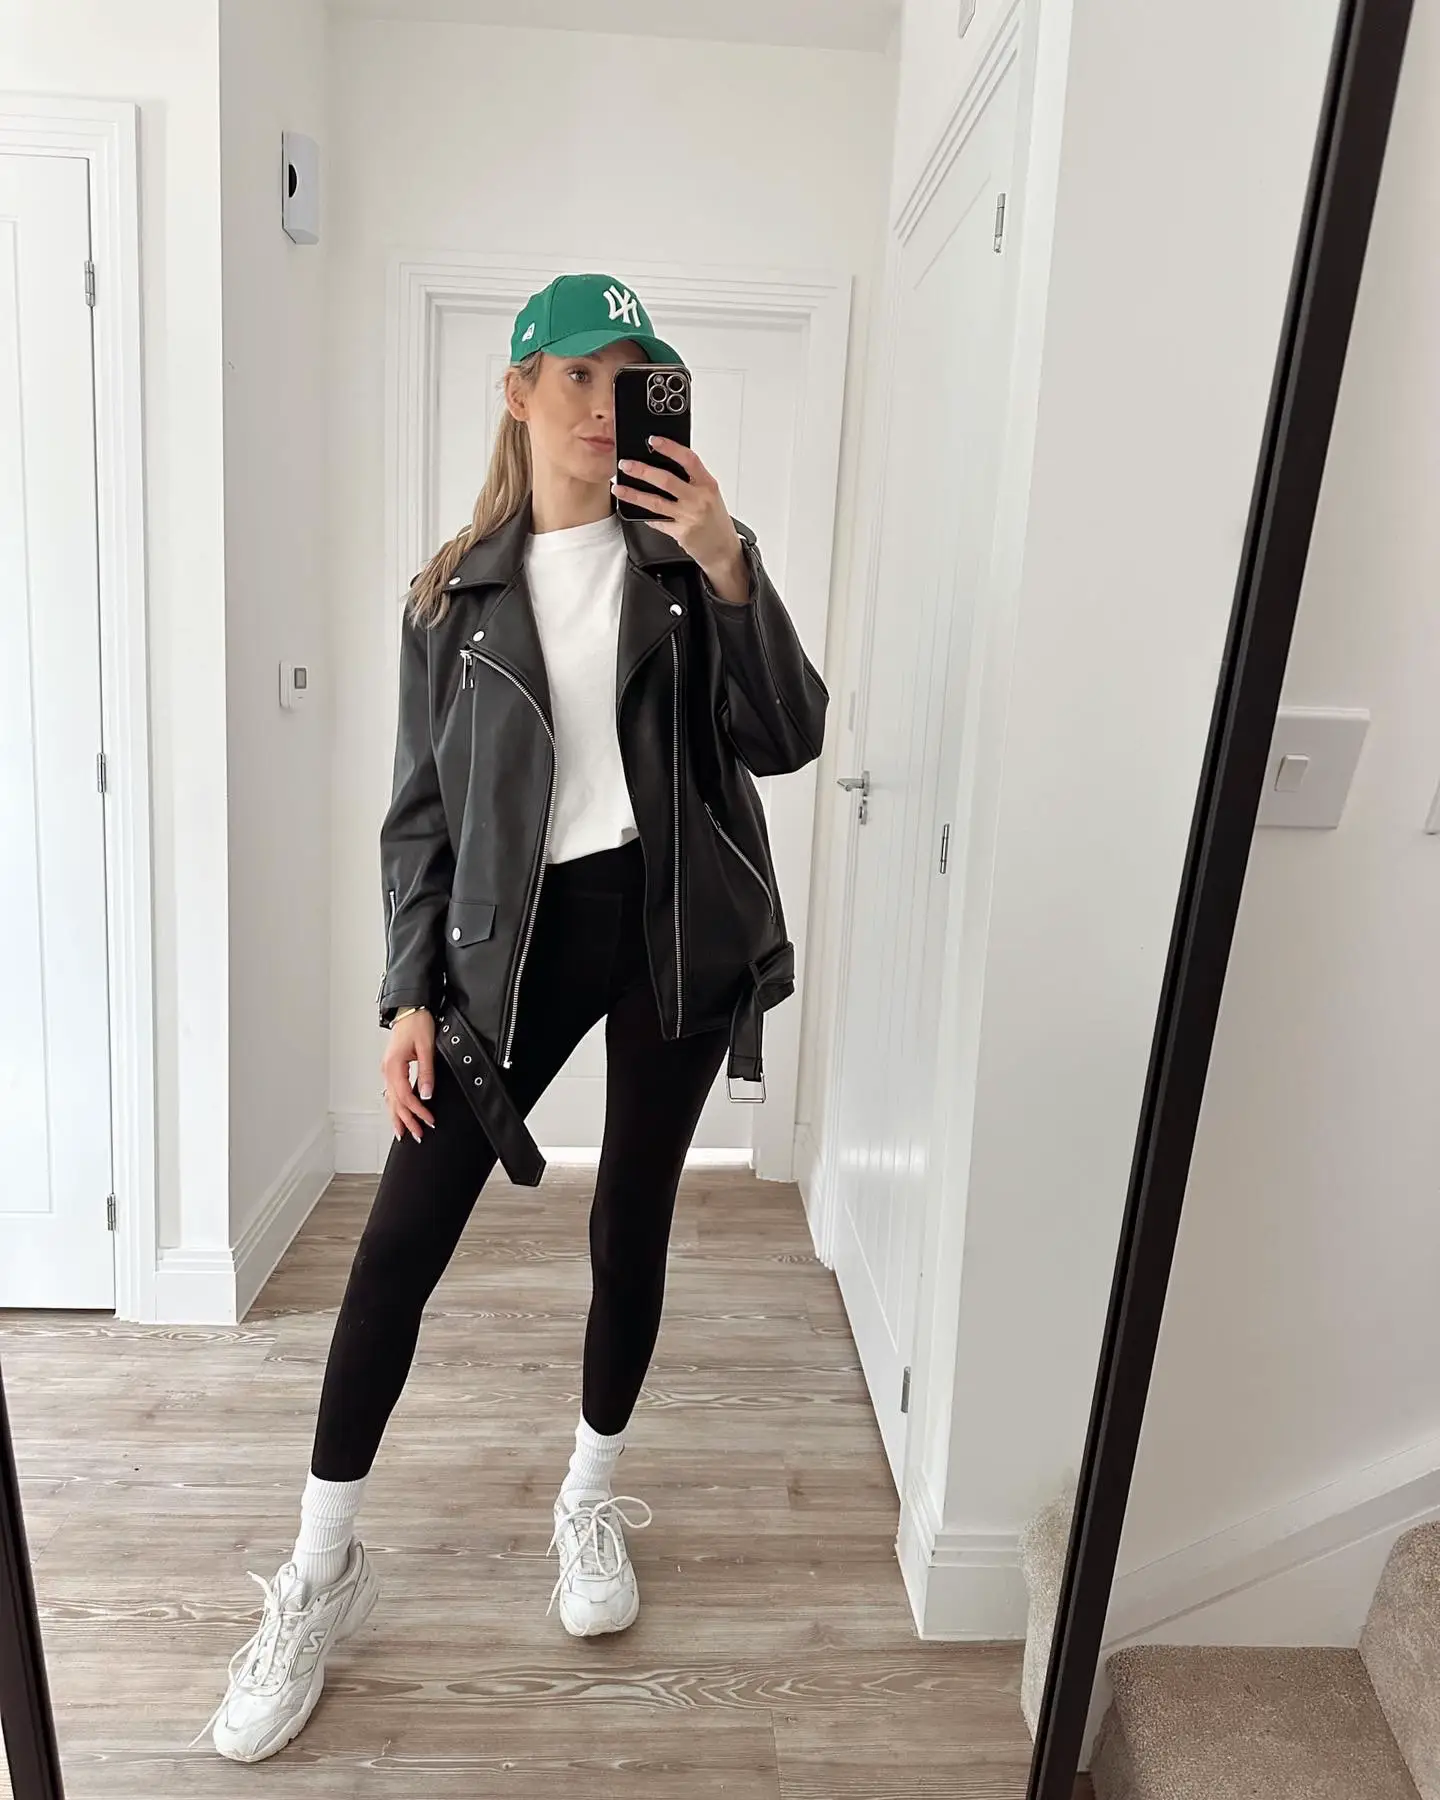 casual golf outfit with leggings - Lemon8 Search